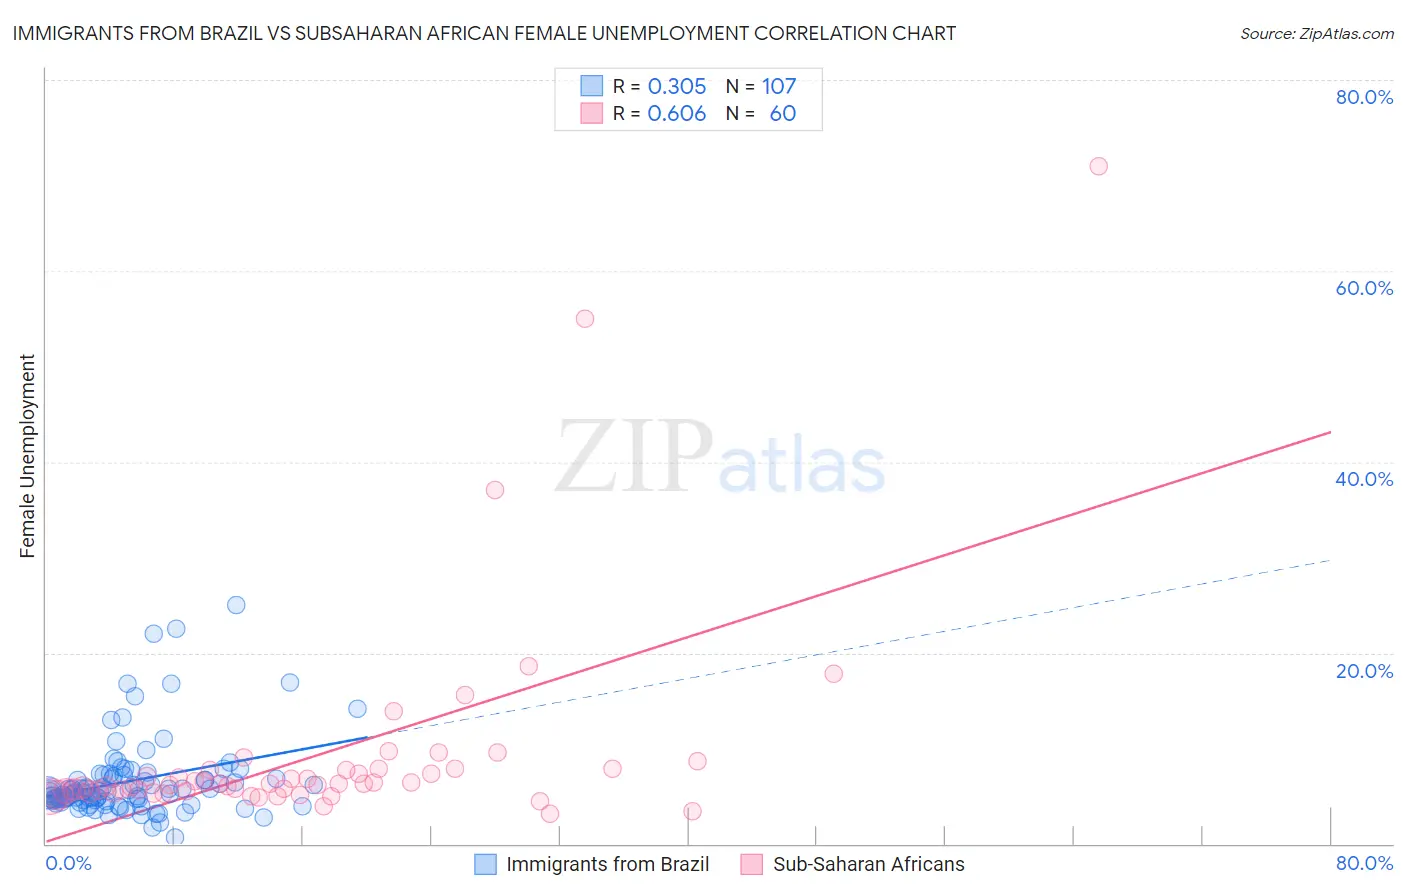 Immigrants from Brazil vs Subsaharan African Female Unemployment